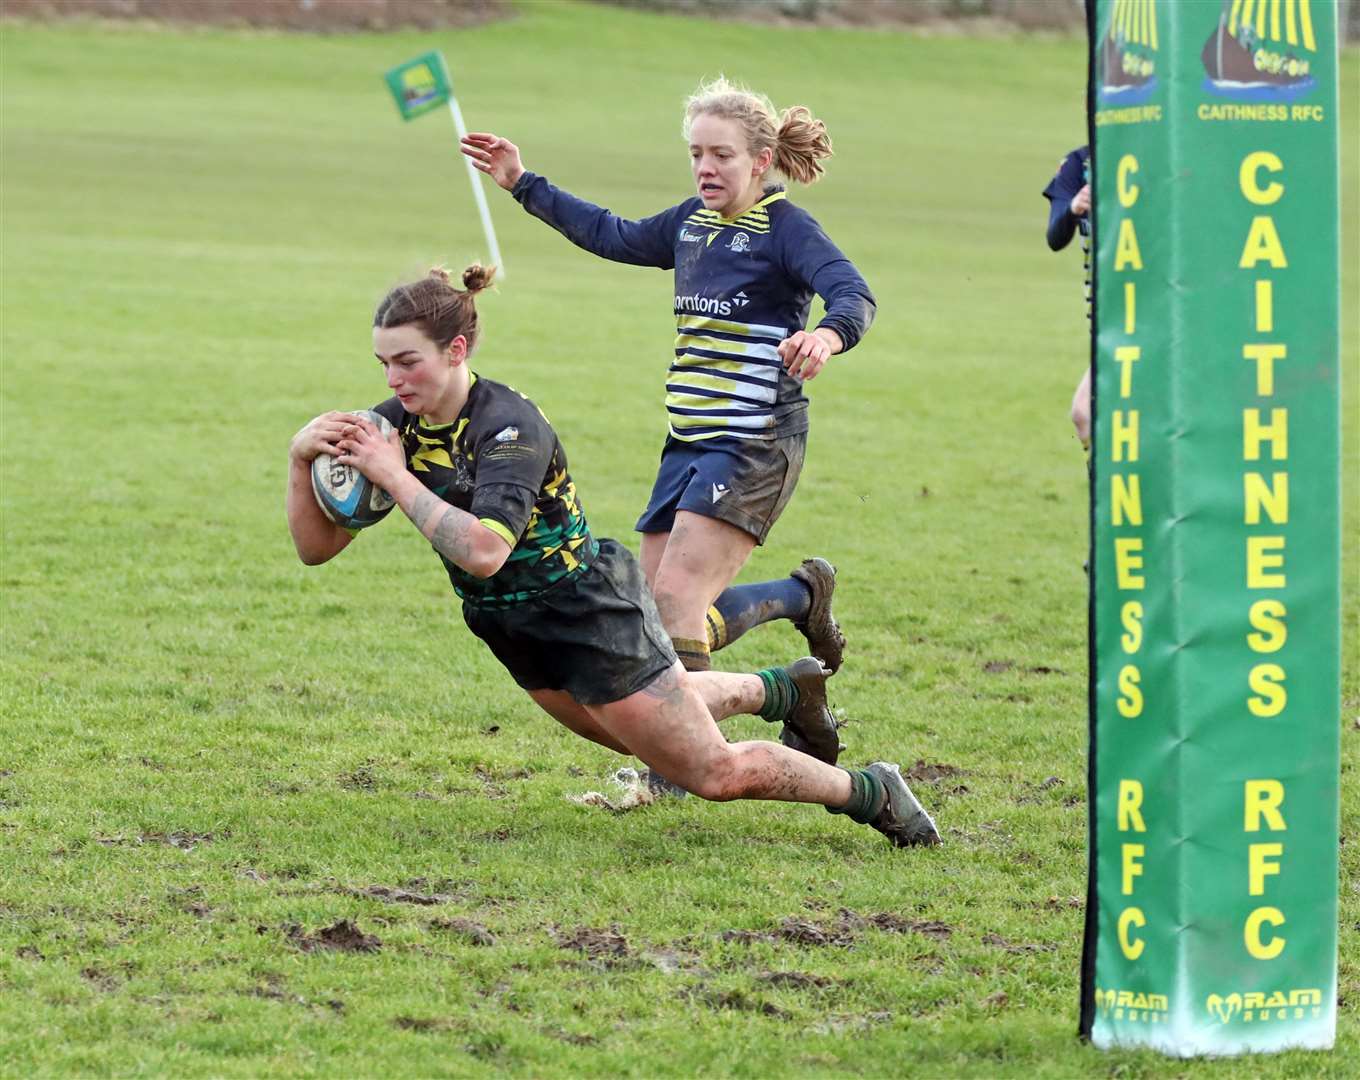 Emmy Smith scores a try between the posts for the Krakens. Picture: James Gunn